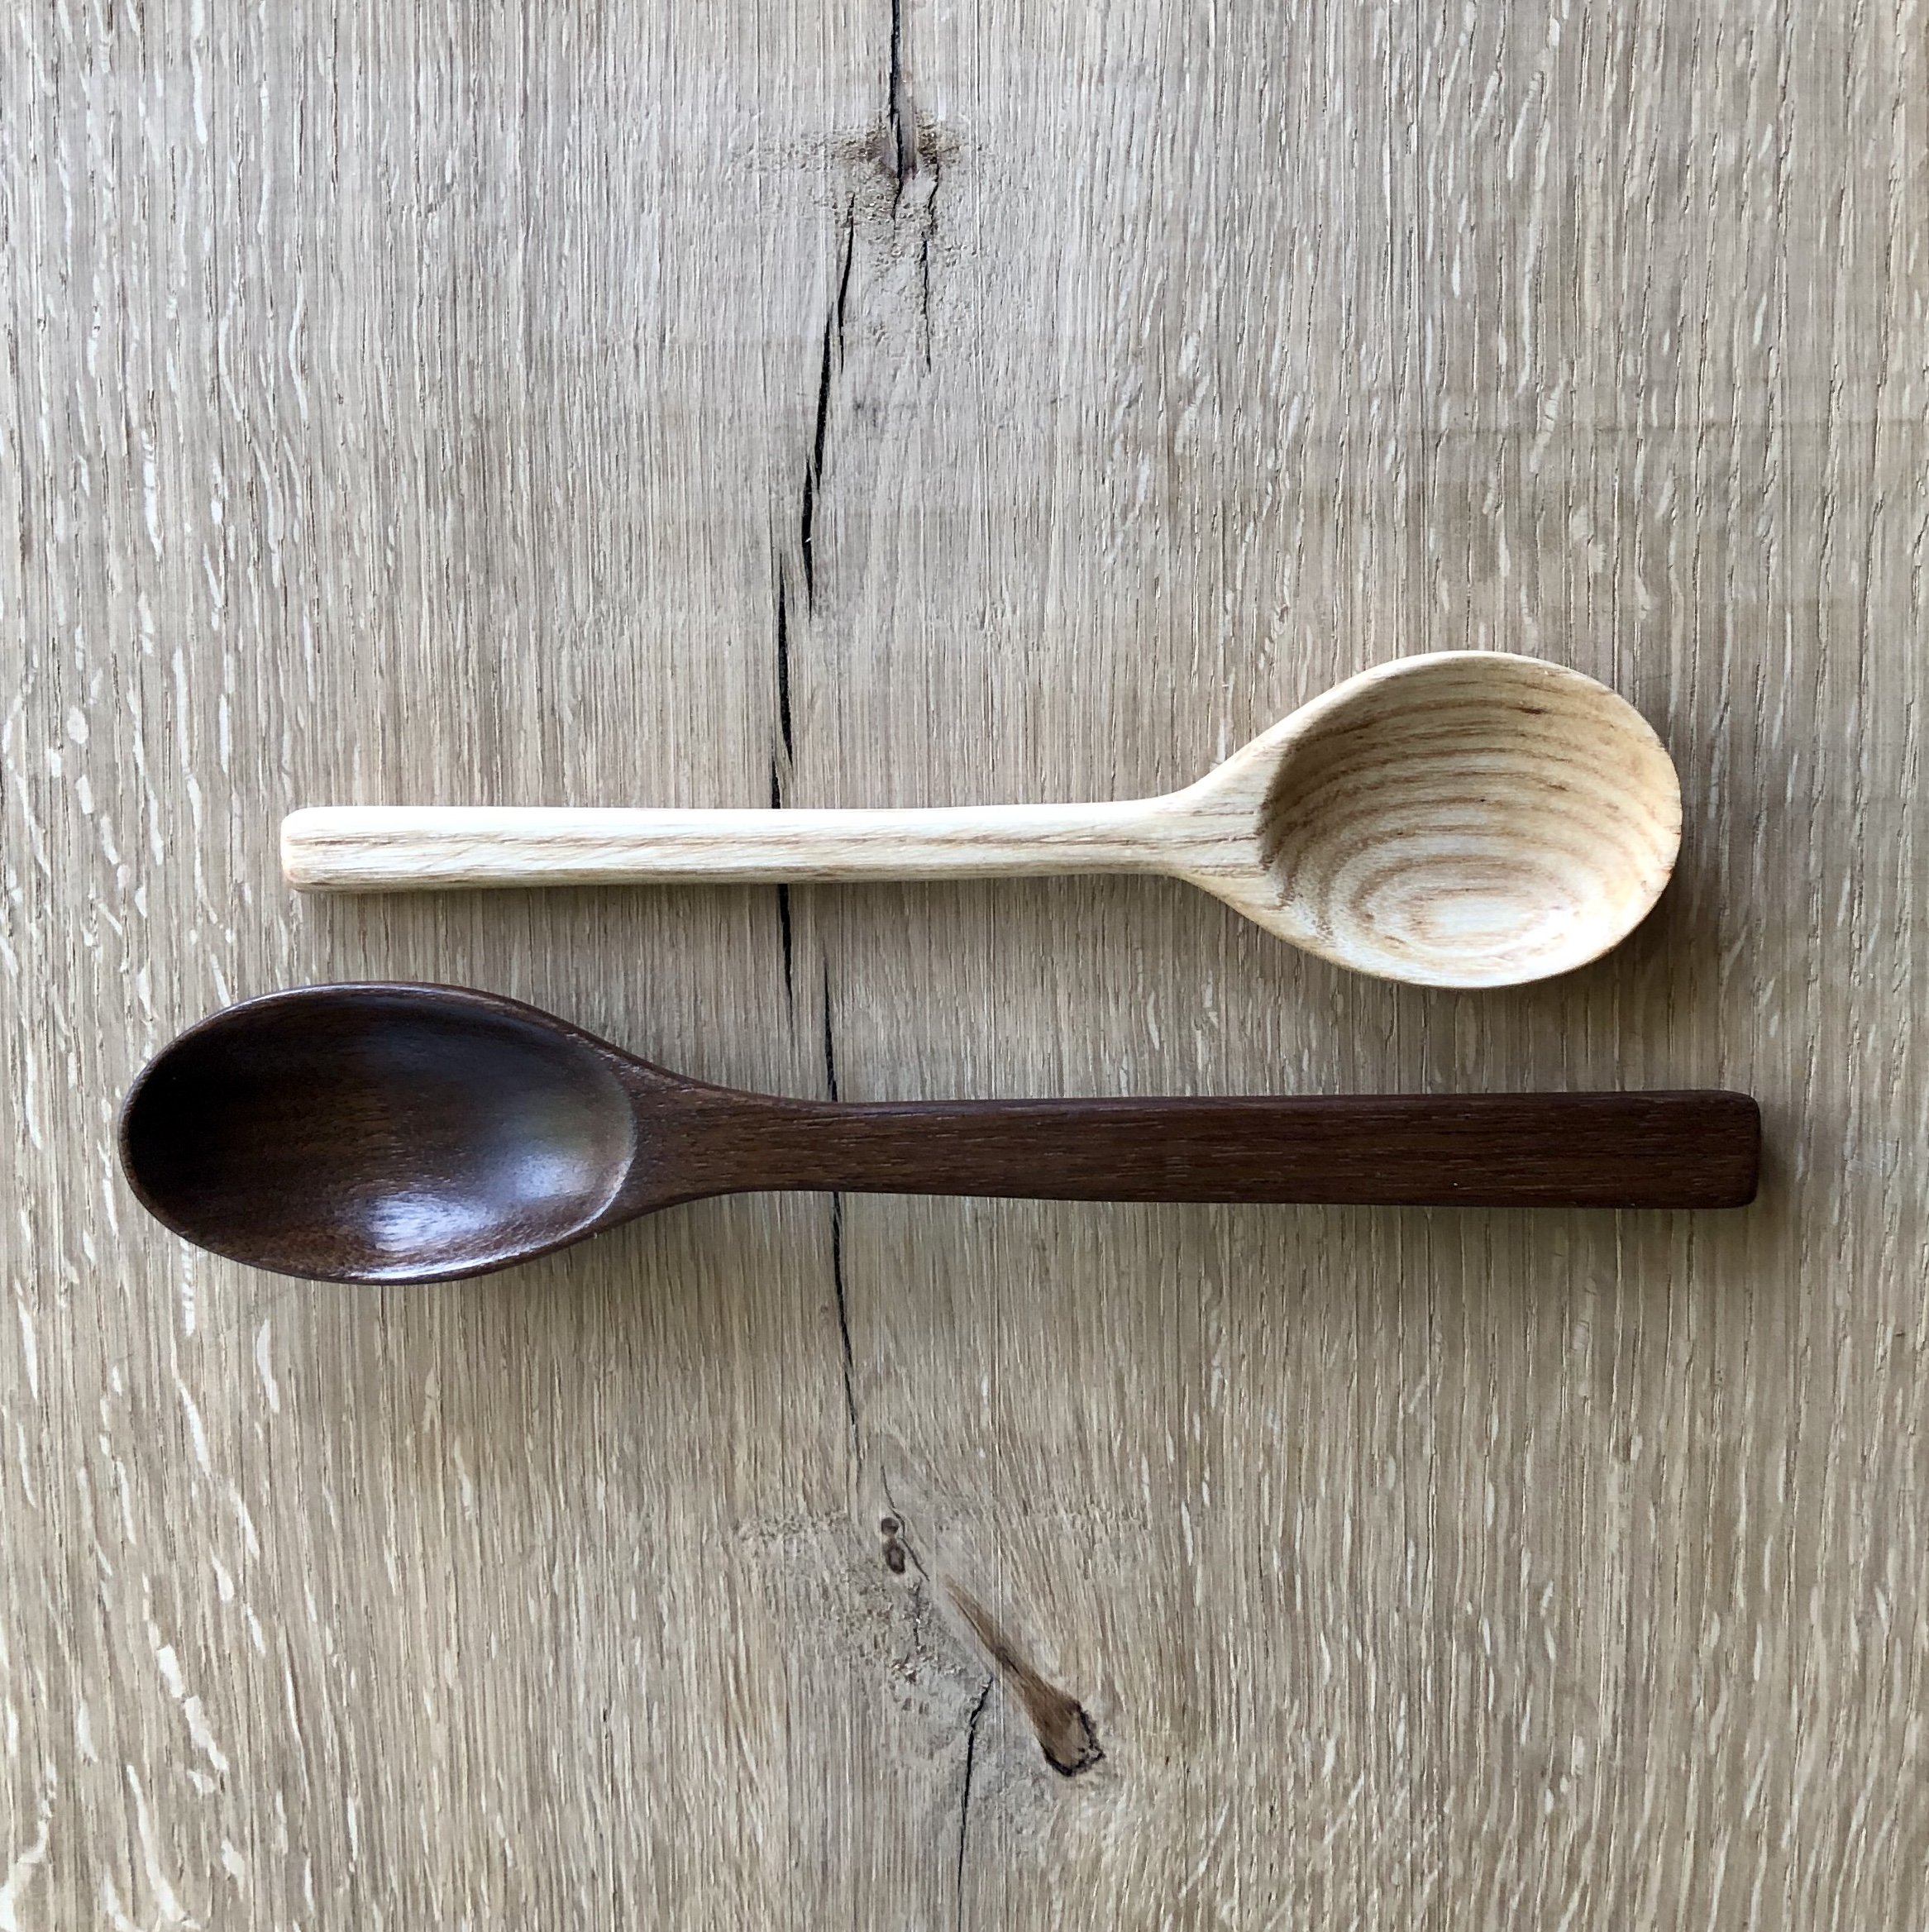 Introduction to woodworking: kitchen utensils